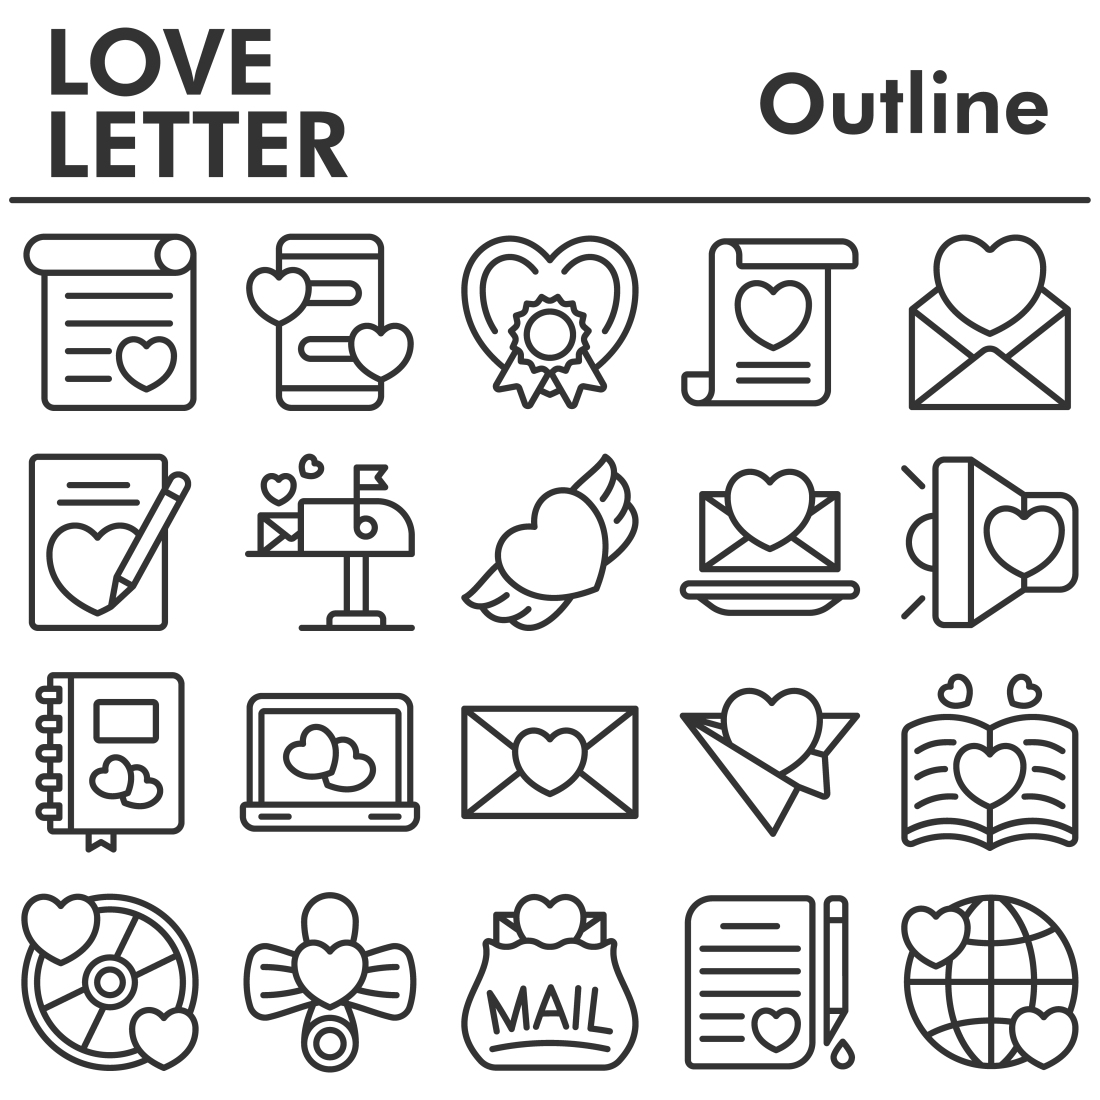 Love letter outline icons.